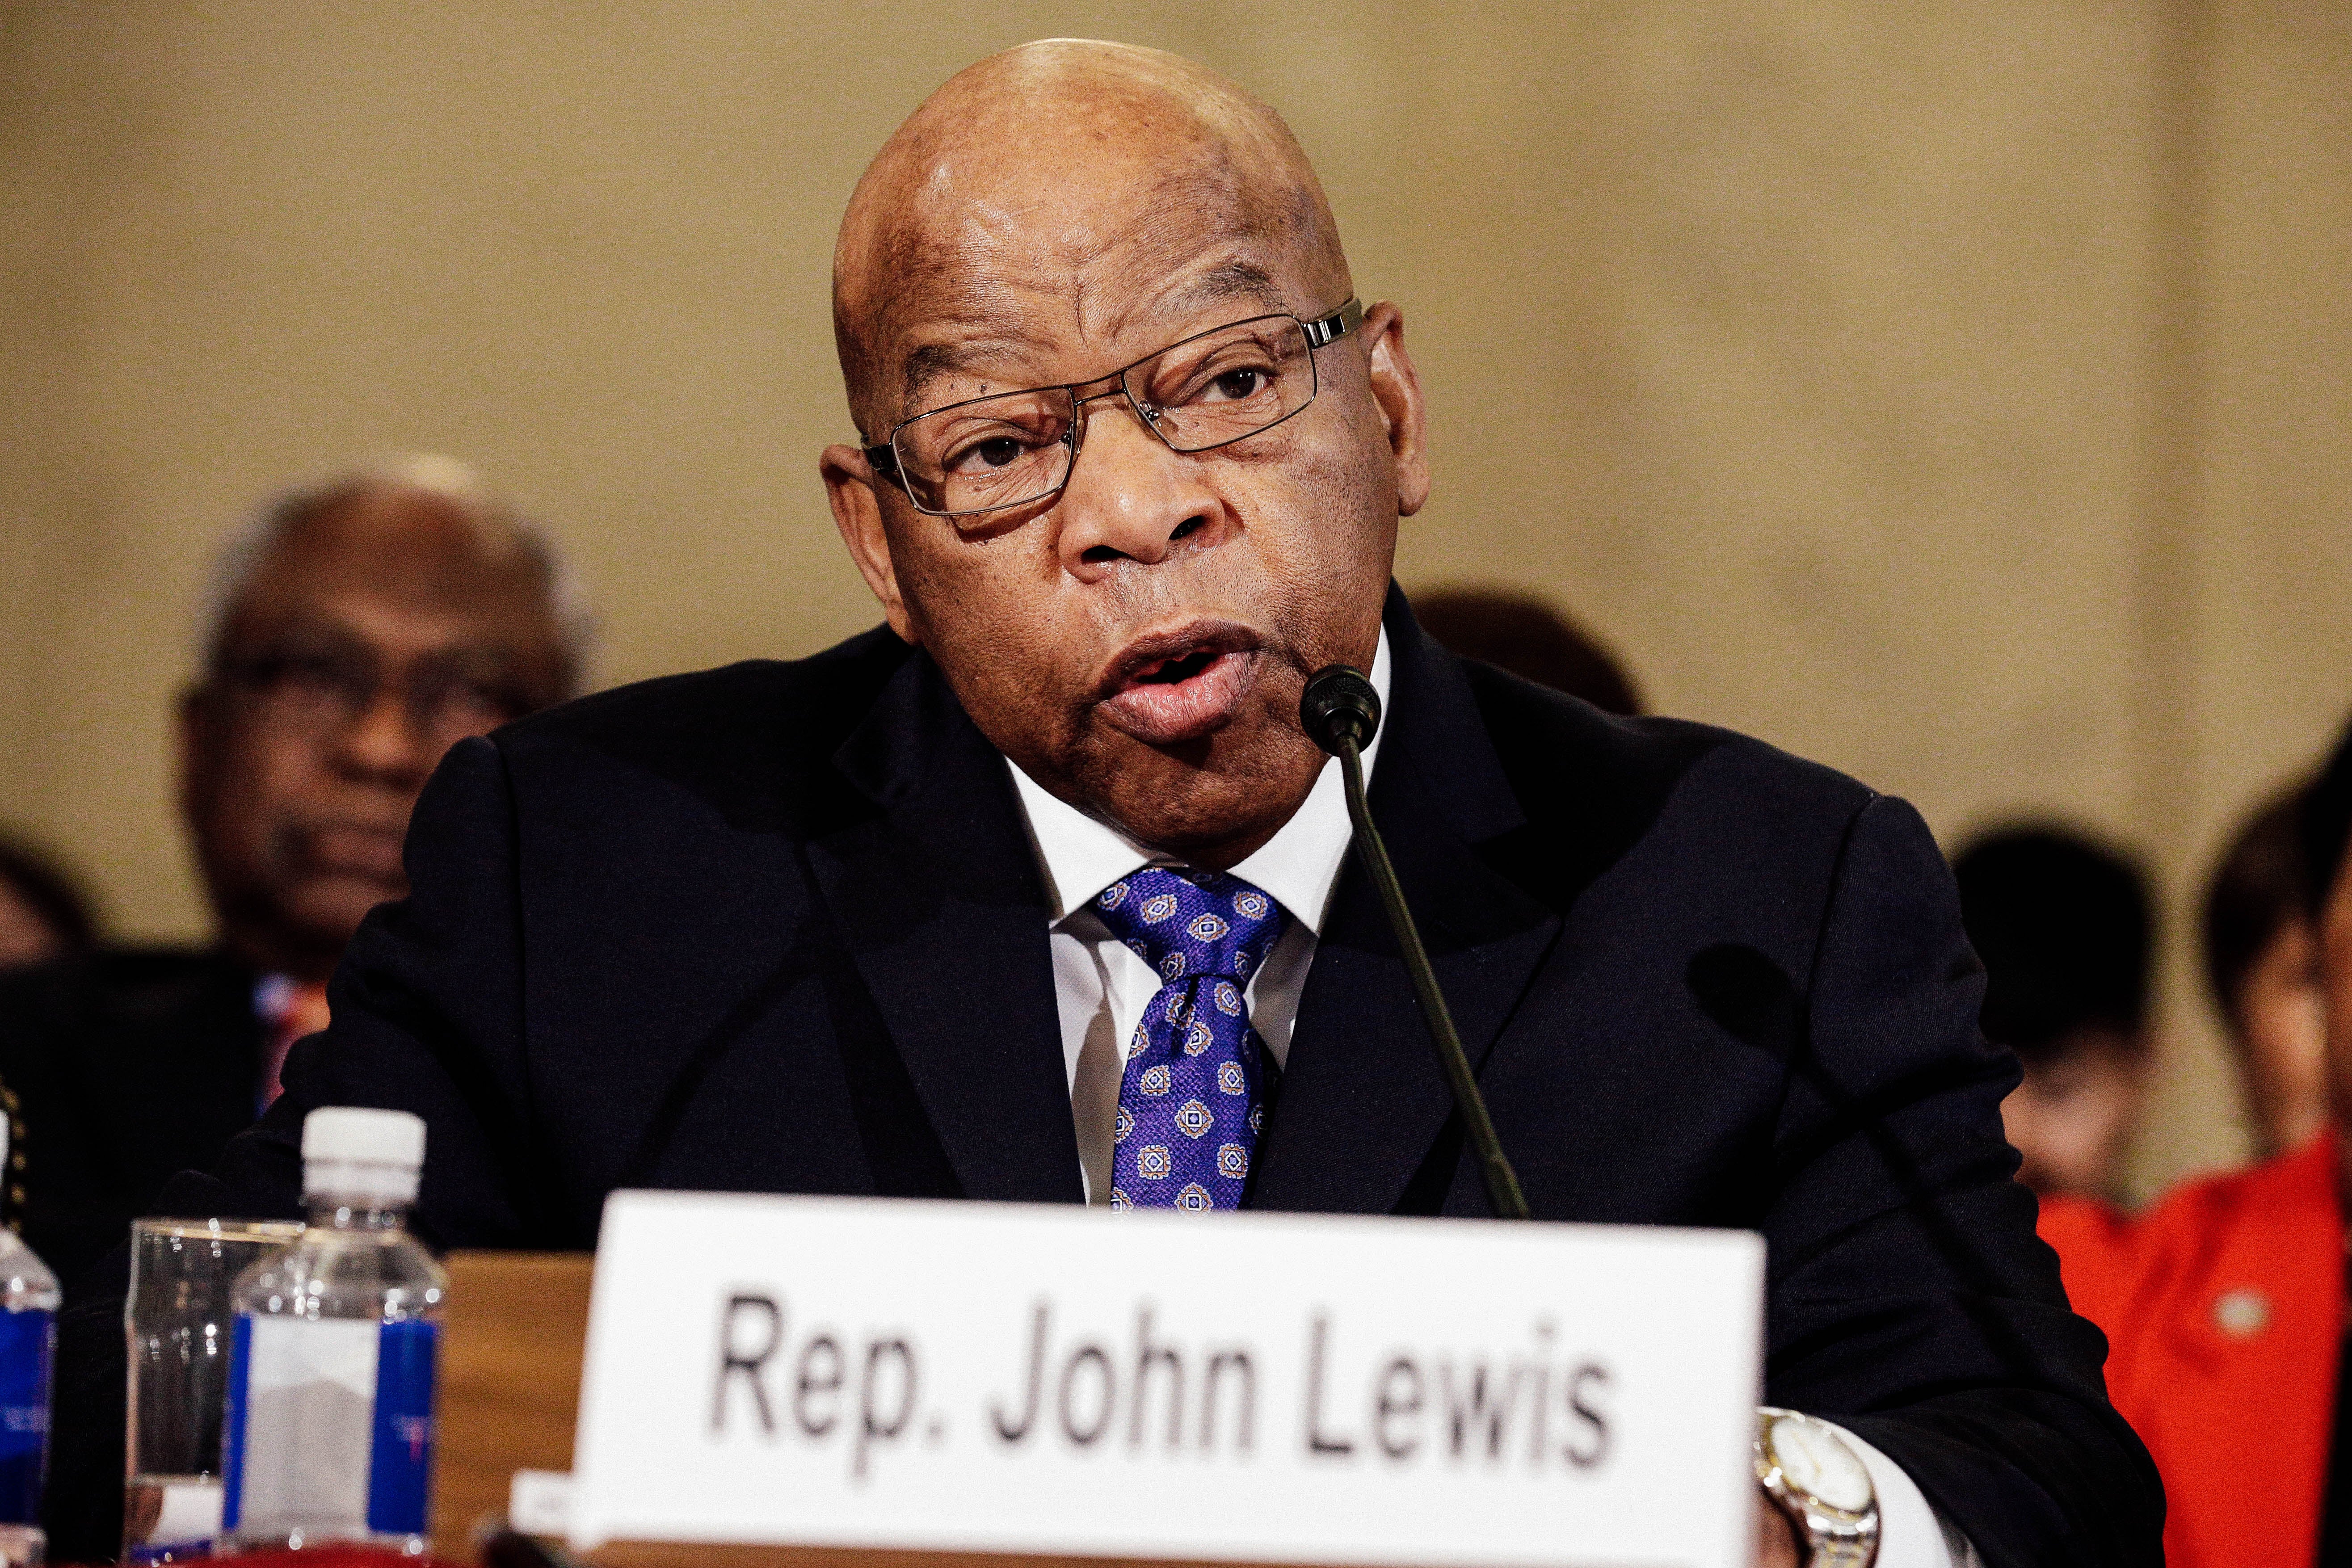 John Lewis speaks at a microphone, with a sign featuring his name displayed in front of him.